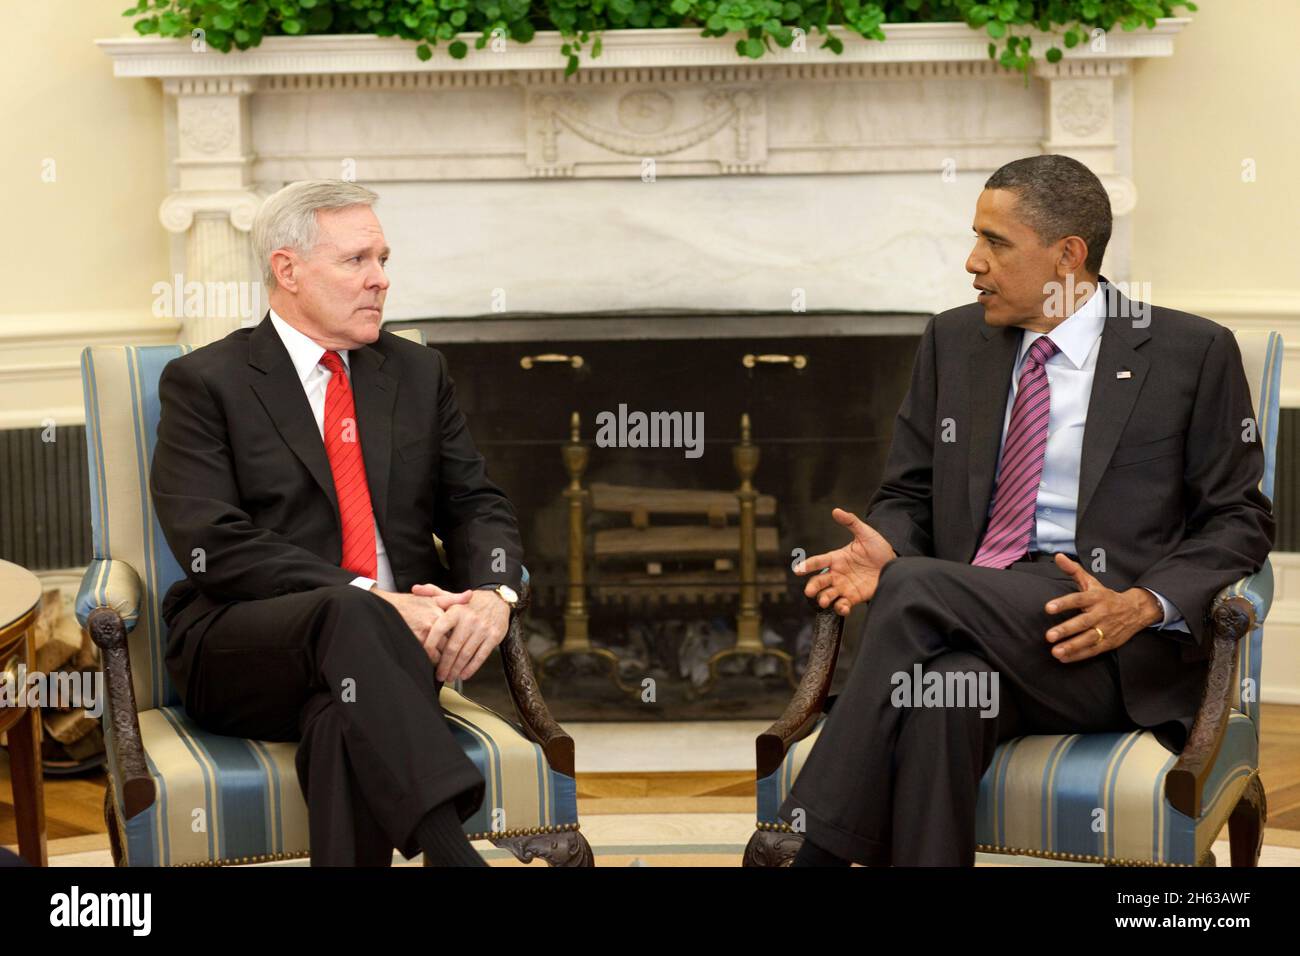 (June 17, 2010) President Barack Obama meets with Secretary of the Navy (SECNAV) Ray Mabus in the Oval Office. Mabus has been selected by Obama to develop a long-term plan for the restoration of the Gulf Coast region in the aftermath of the Deepater Horizon oil spill. Deepwater Horizon was an ultra-deepwater oil rig that sank April 22, causing a massive oil spill threatening the U.S. Gulf Coast. Stock Photo